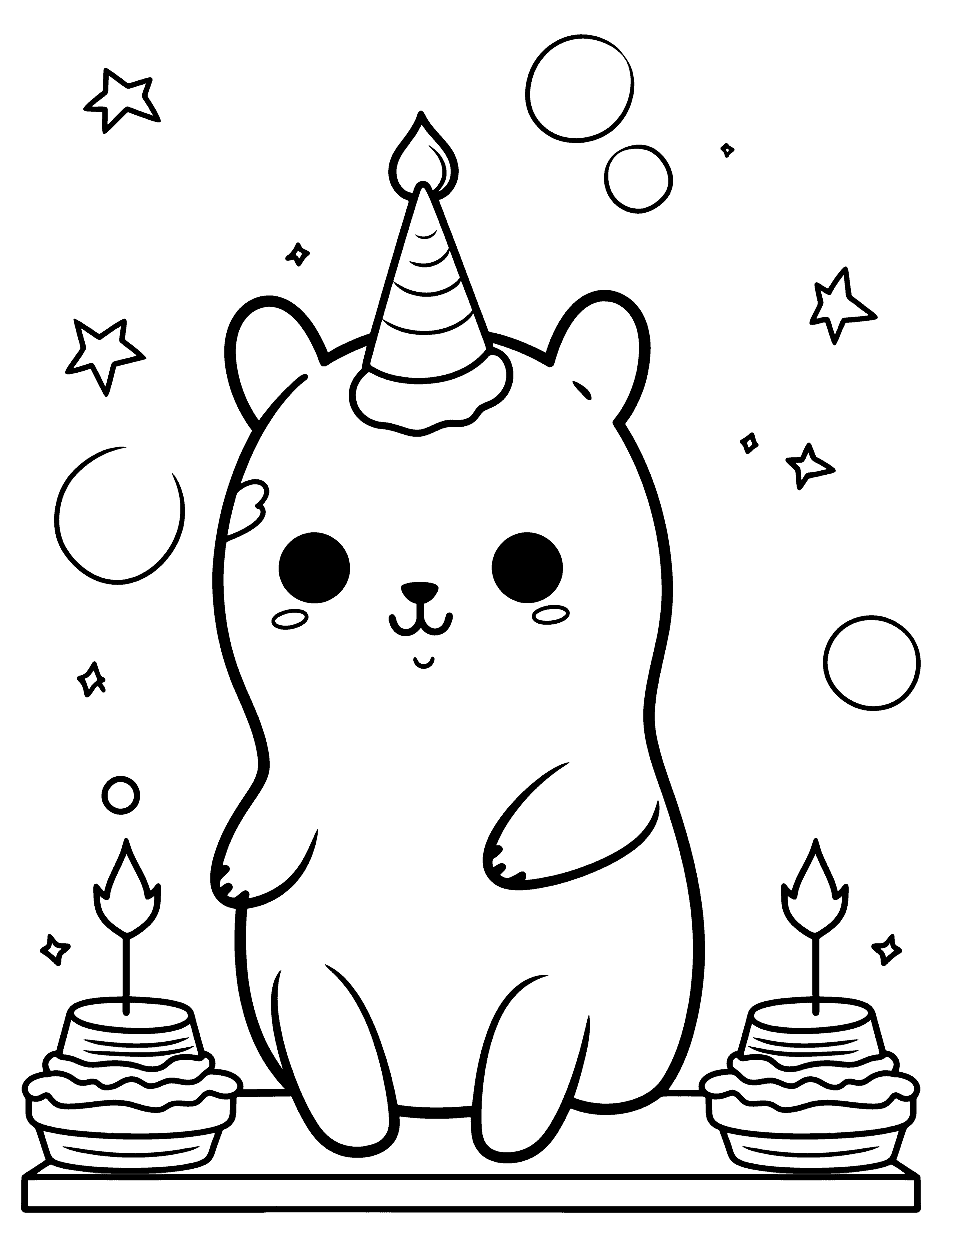 UEFINAL5 Kawaii Coloring Pages, Cute Coloring Pages V.4